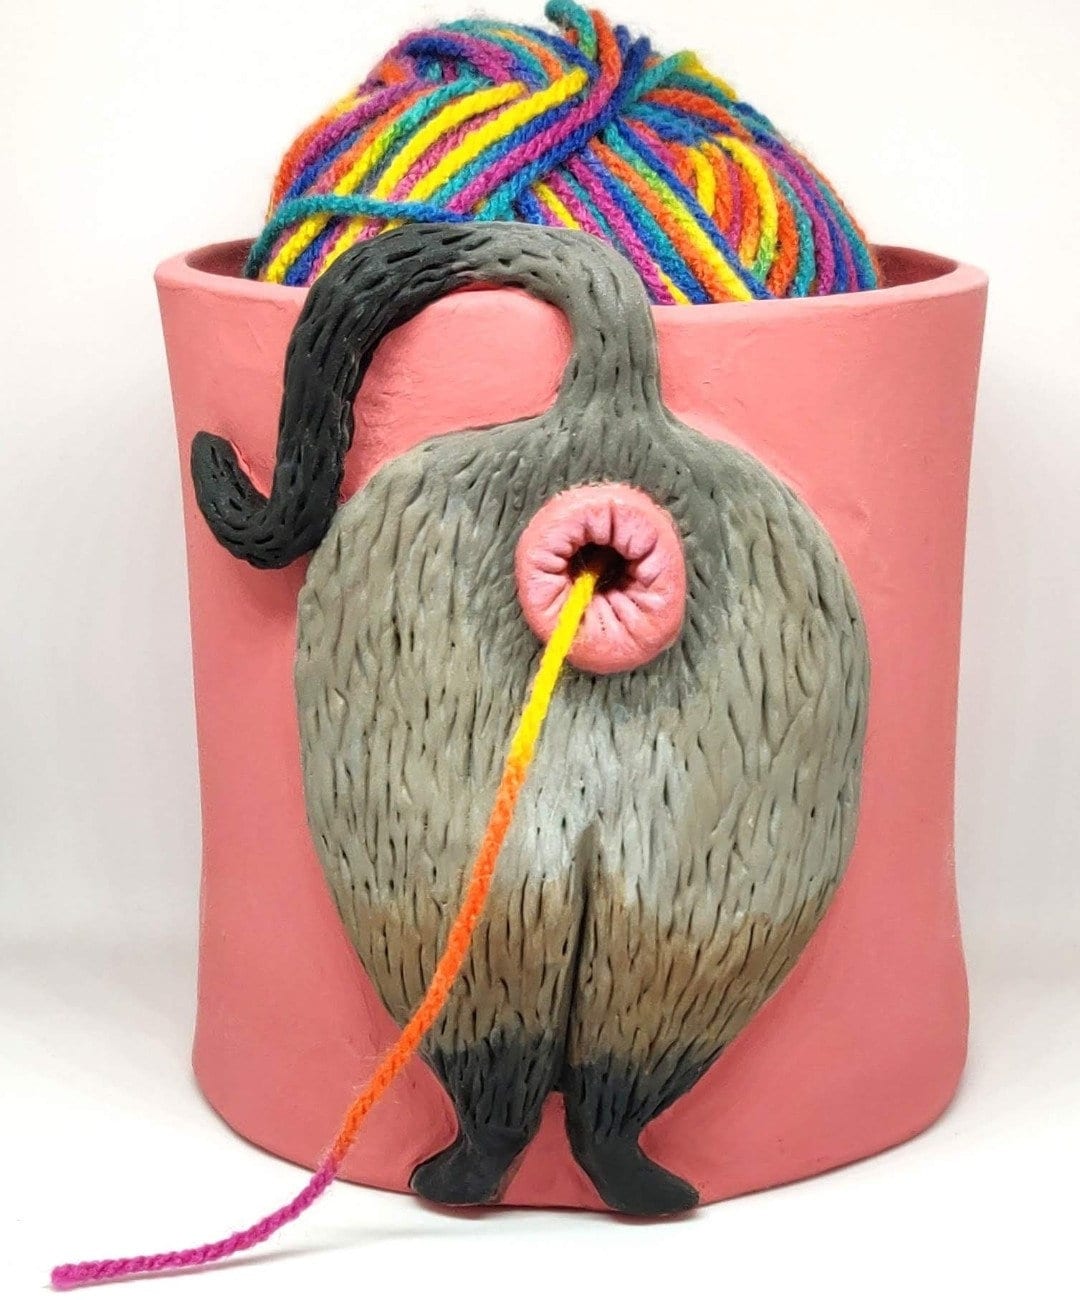 Pets - Crazy Cat Lady - Yarn Bowl - 12 in.